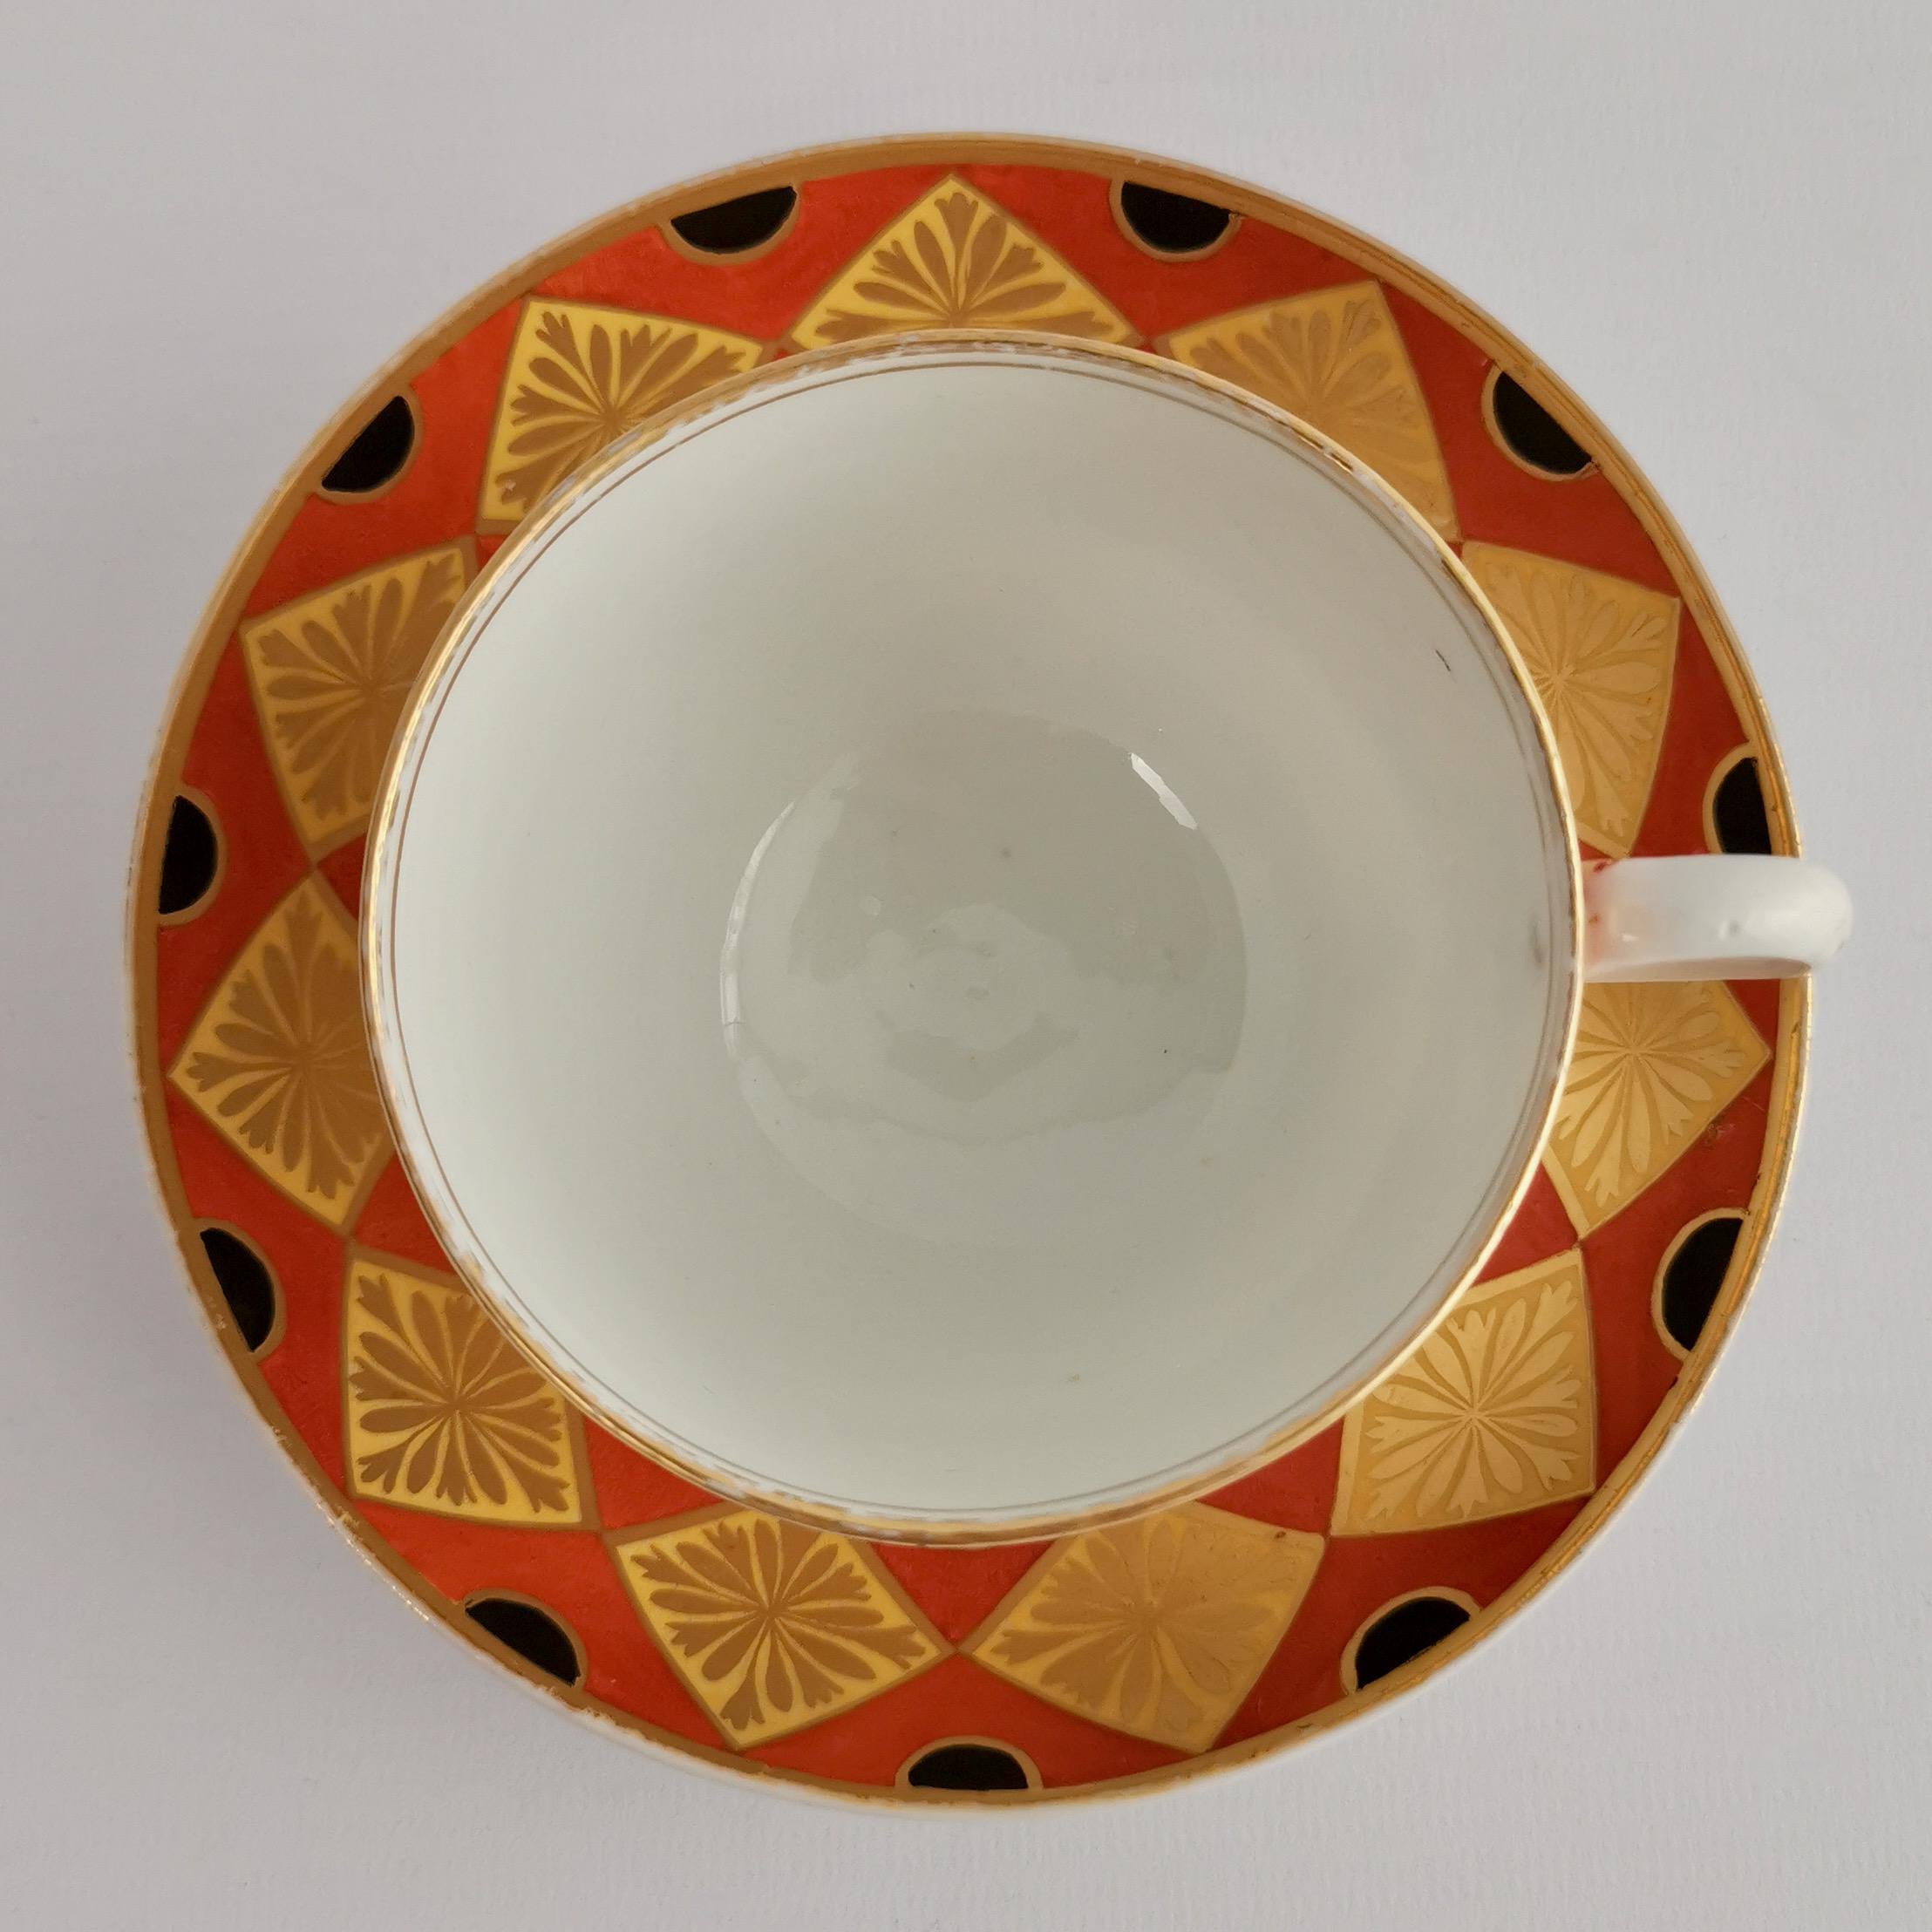 English Coalport Porcelain Teacup, Neo-classical Design Red, Yellow and Black, ca 1805